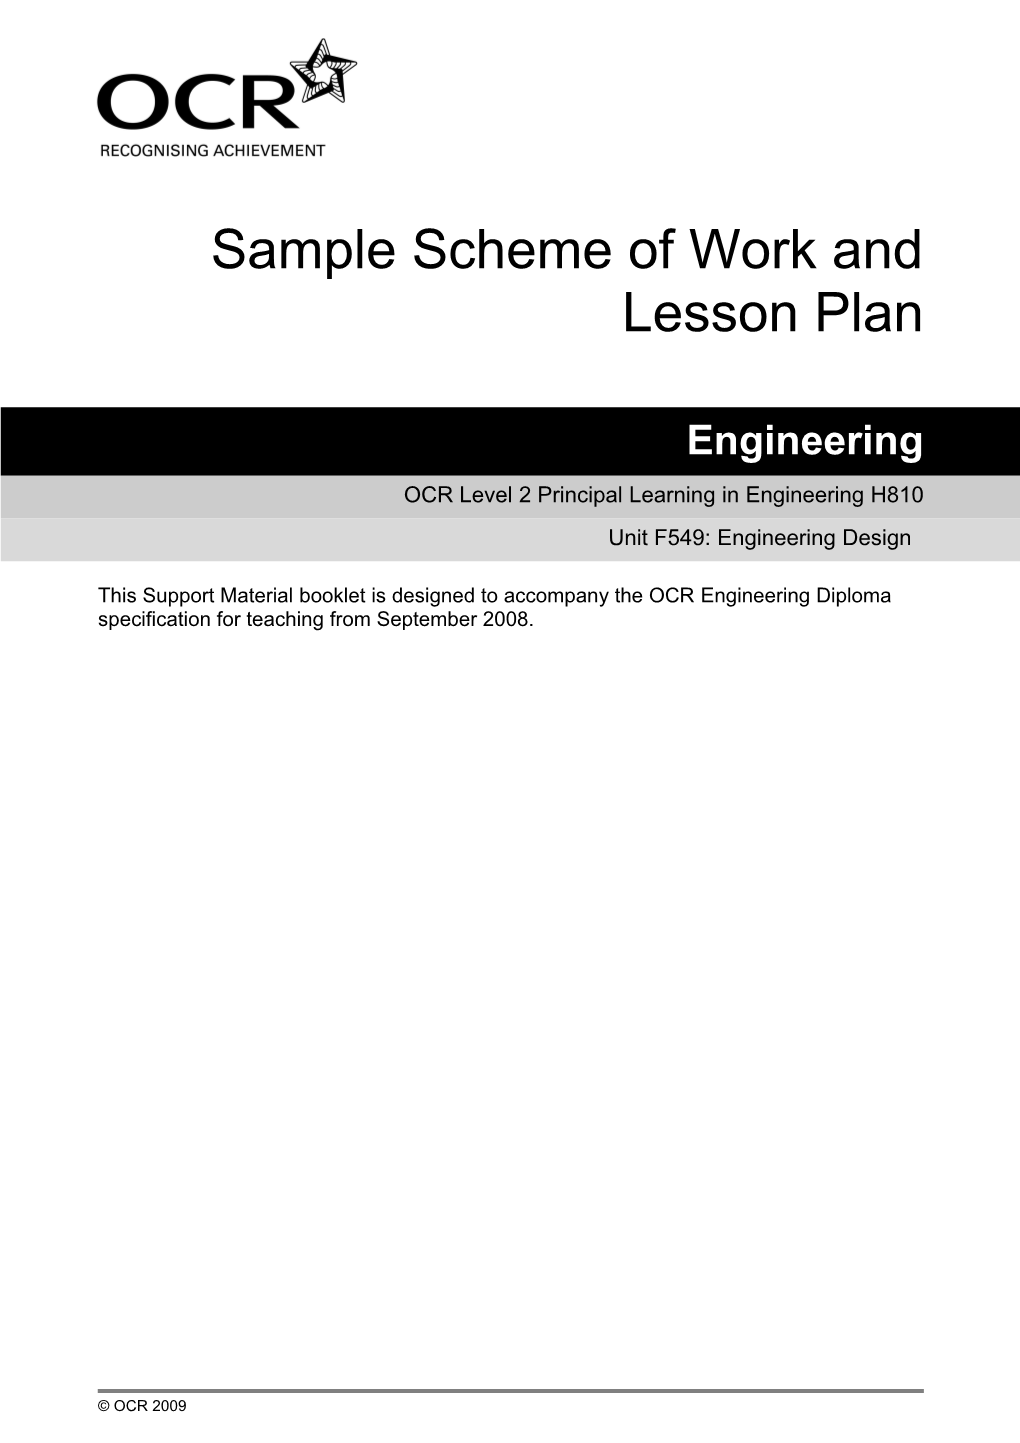 Sample Scheme of Work and Lesson Plan s1